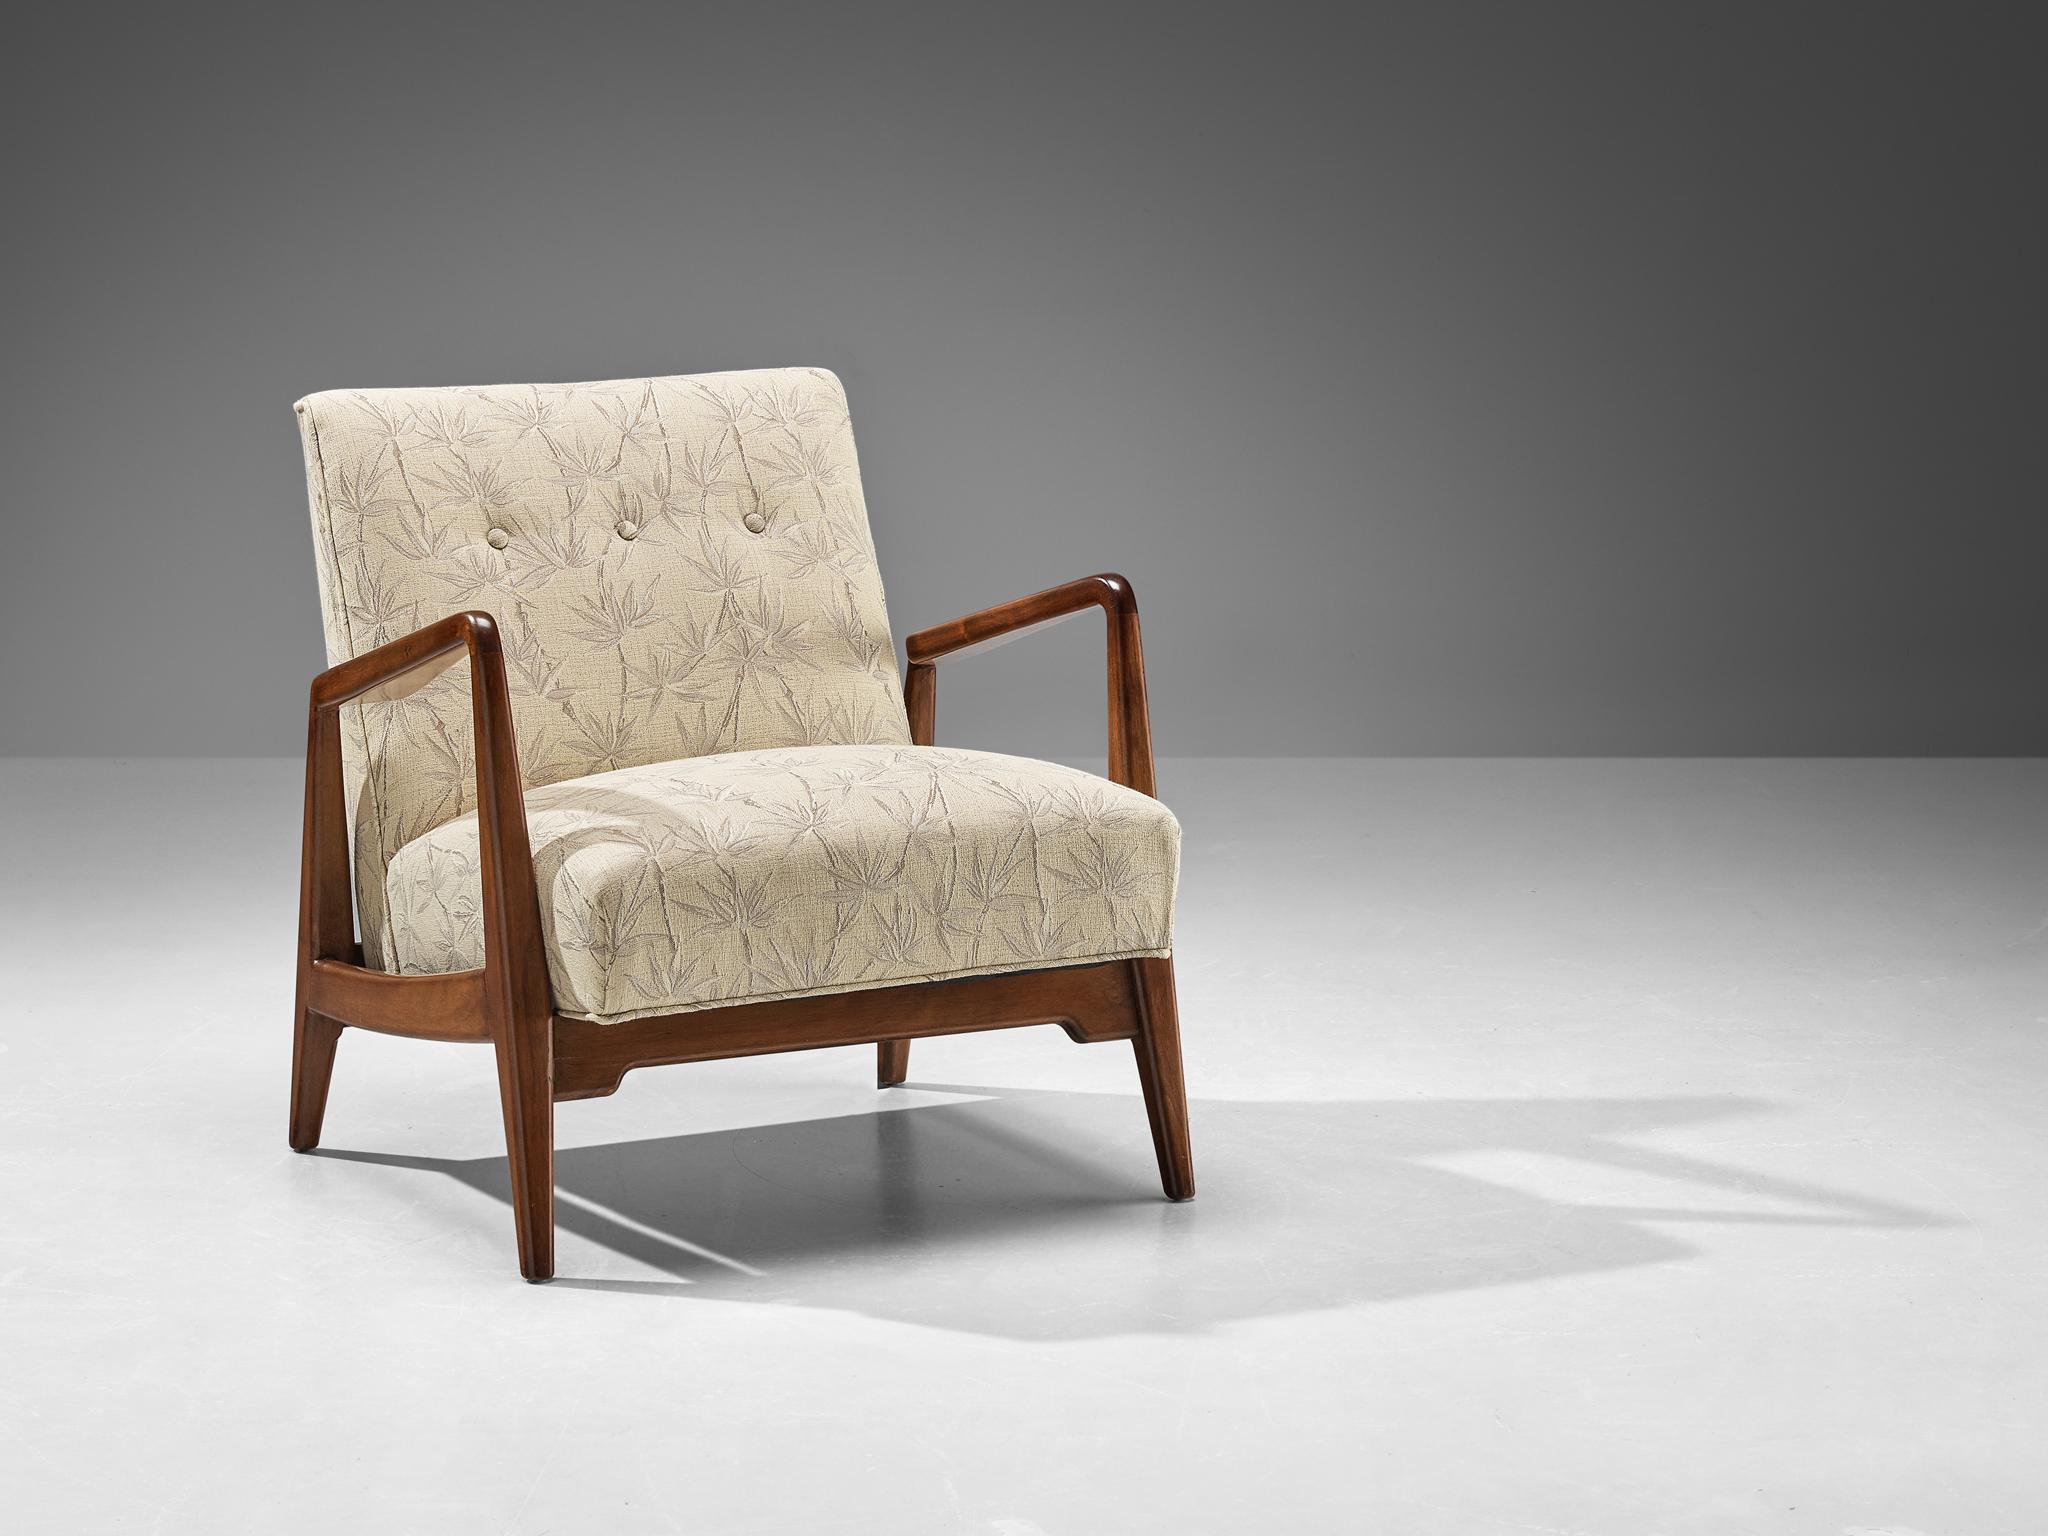 Jens Risom lounge chair, American walnut and bamboo fabric, United States 1960s.

This lounge chair is designed by Danish designer Jens Risom. It is executed in American walnut wood and presents an open arm frame with pointed upwards armrests that